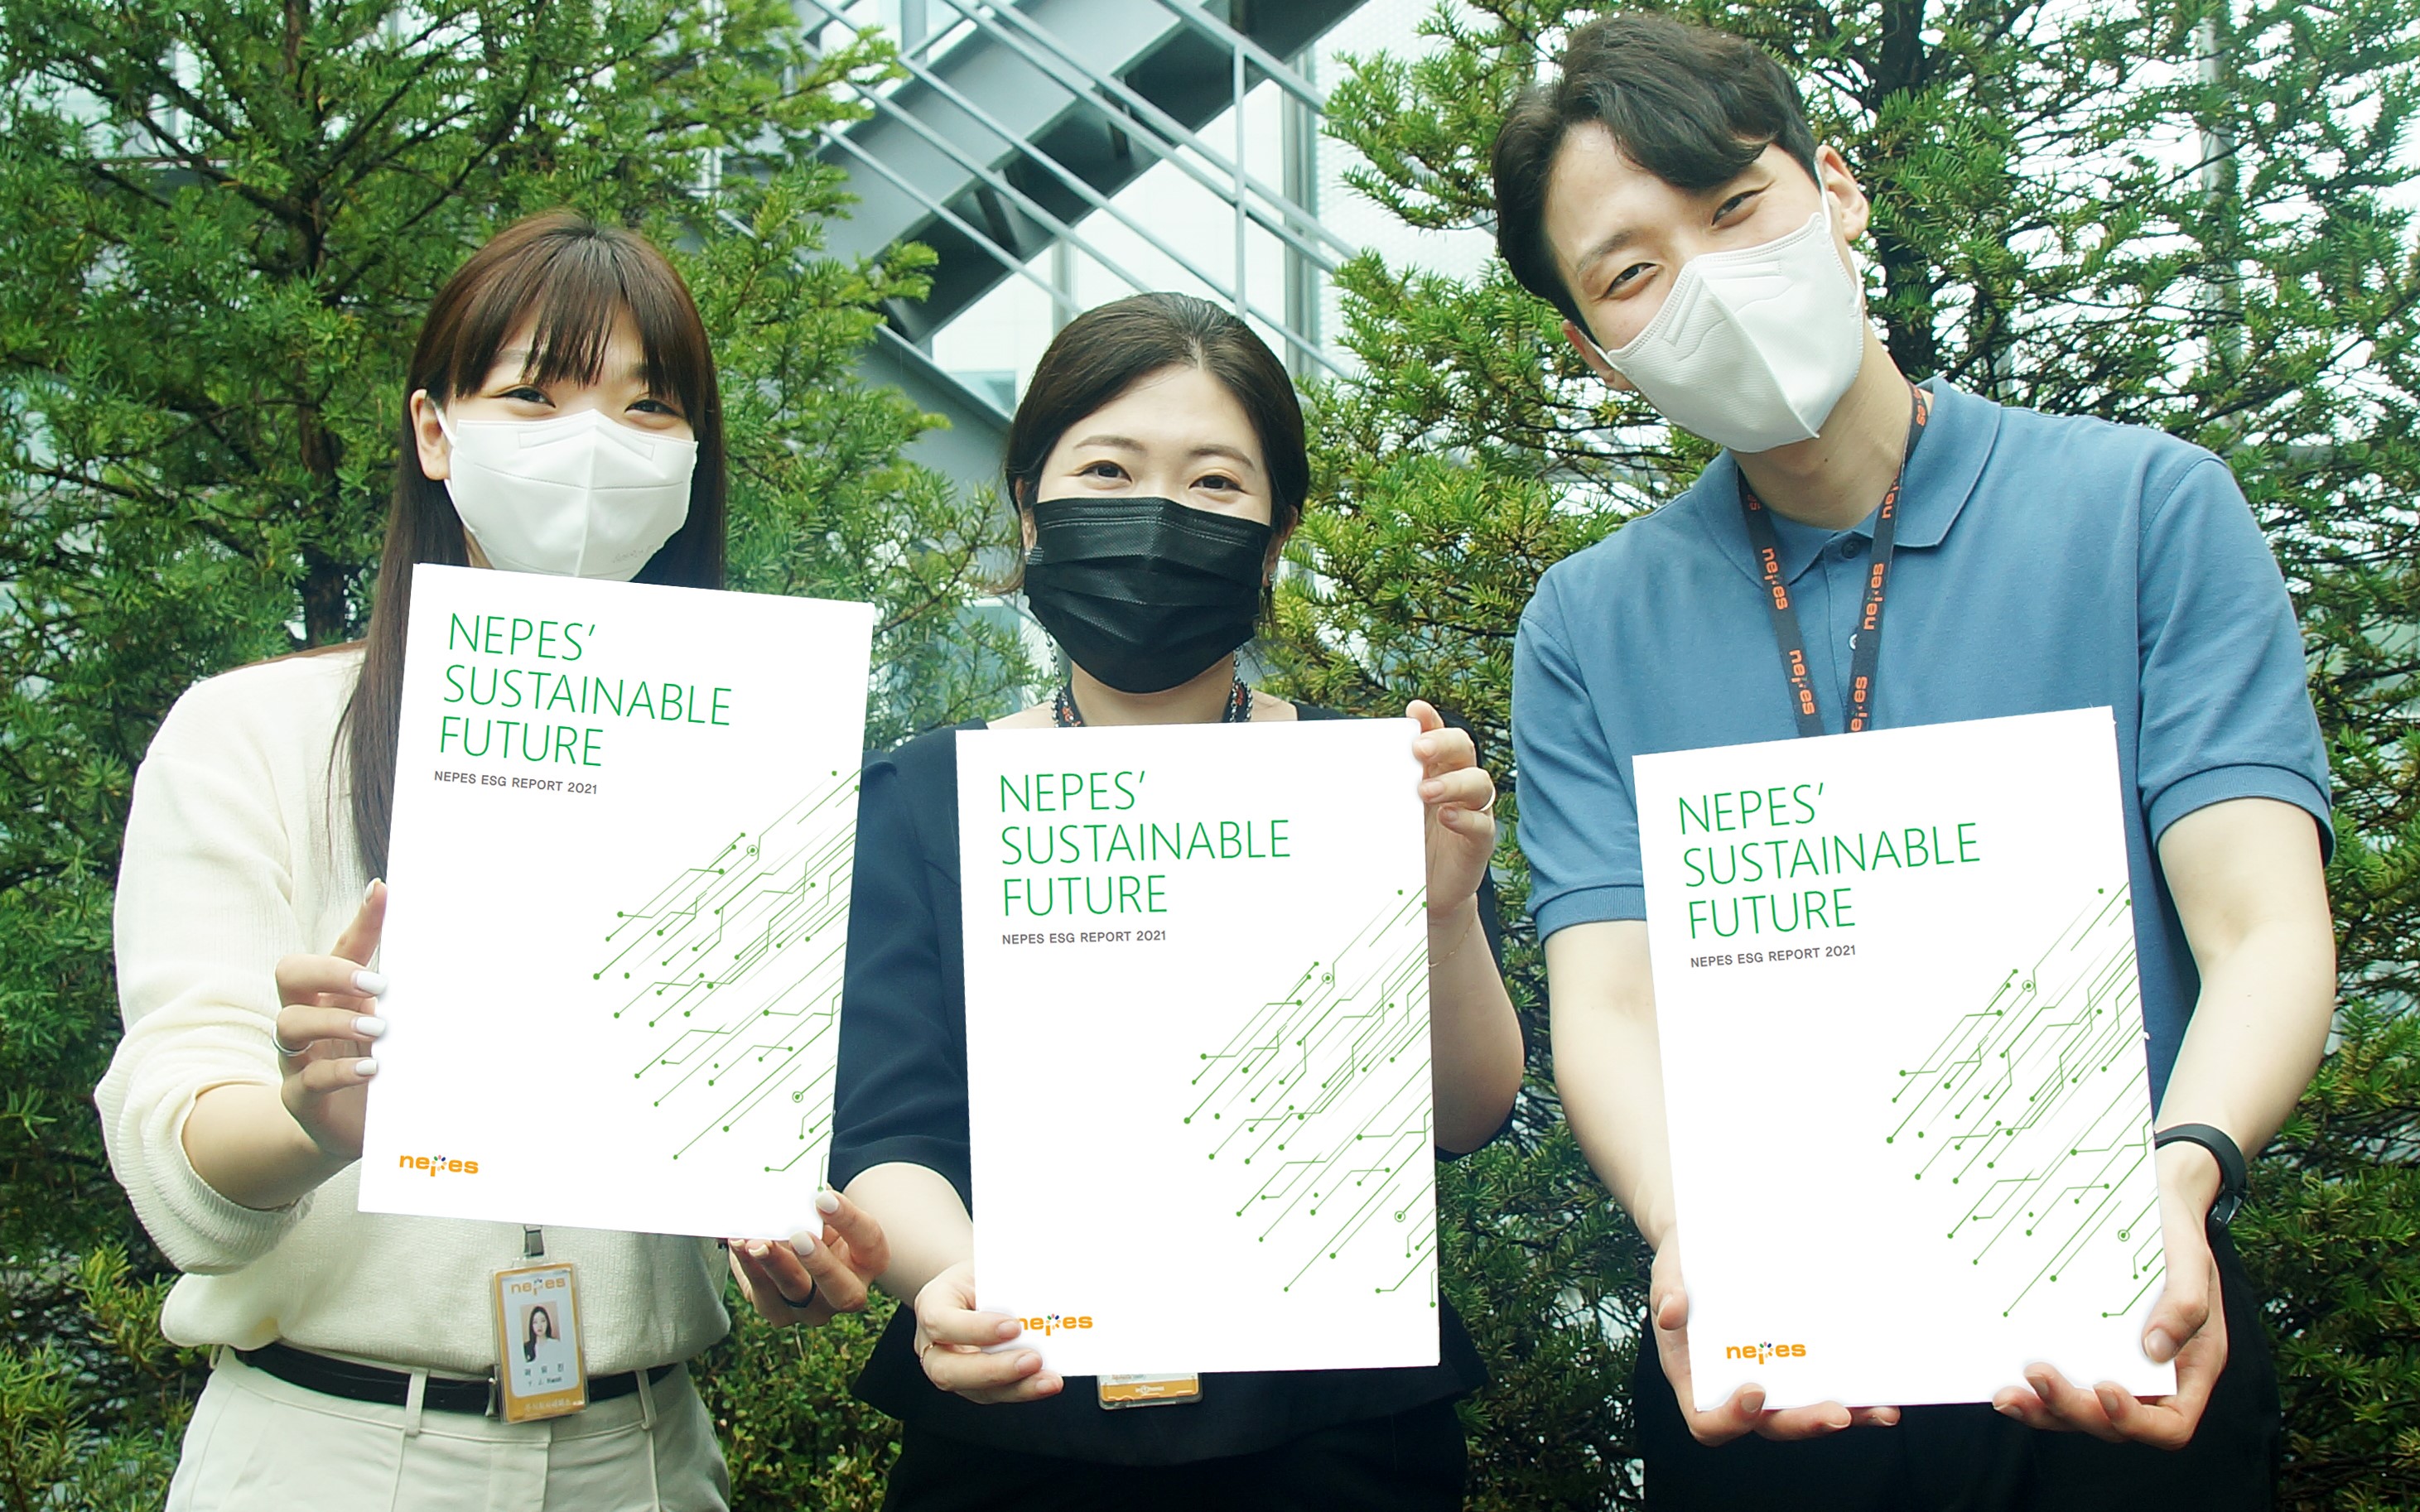 Nepes, released the first ESG report...containing 'sustainable future' 